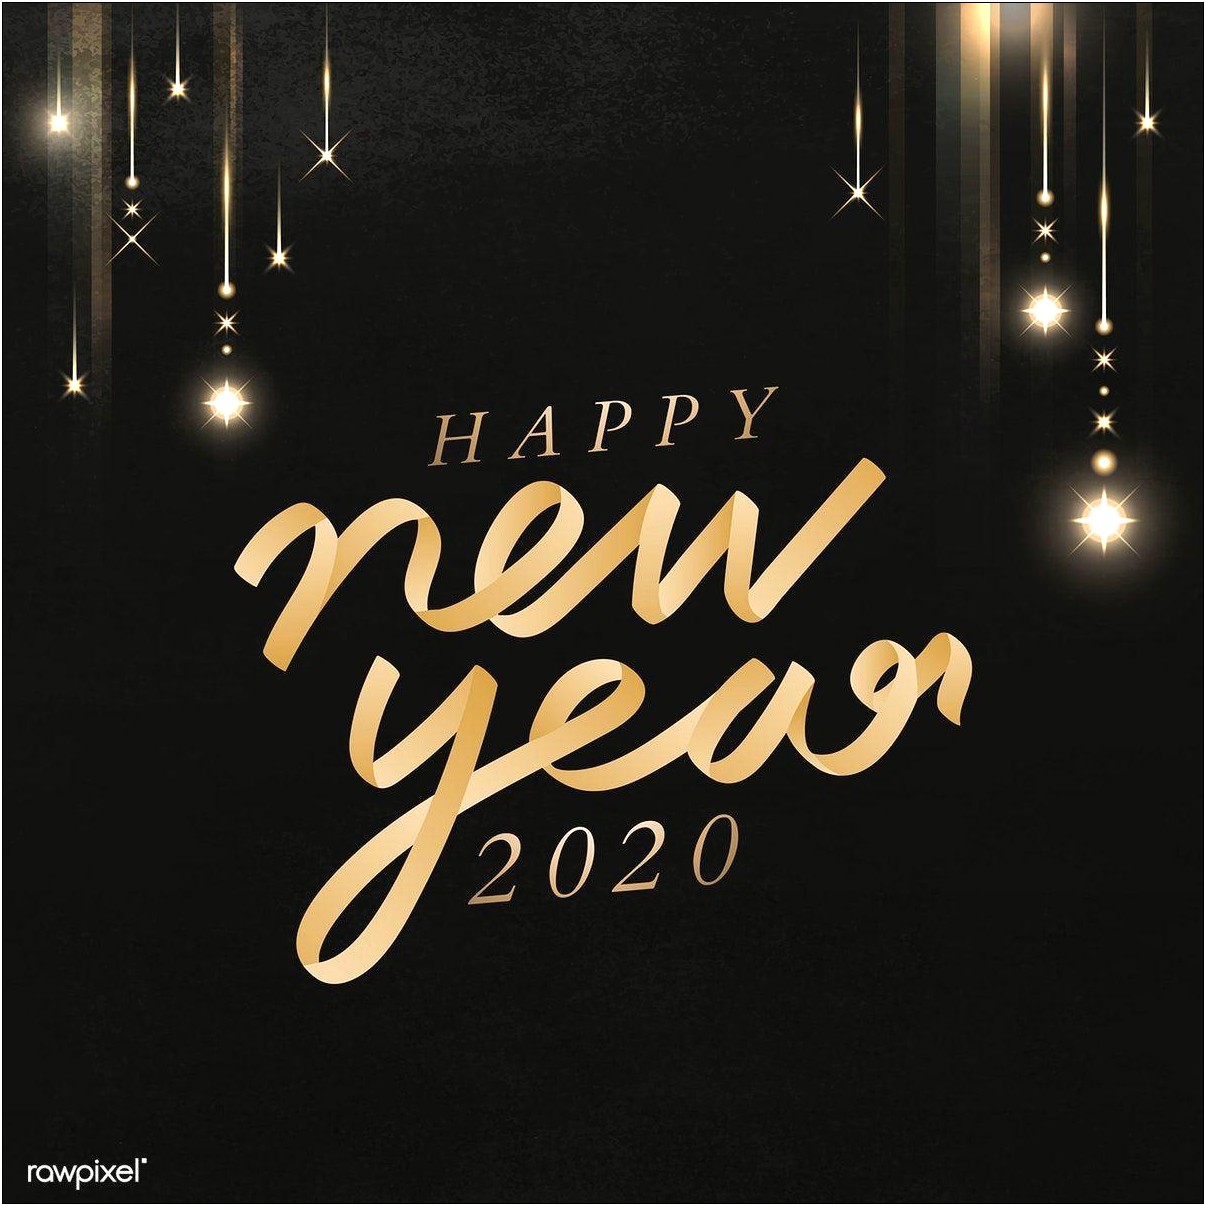 Happy New Year 2020 Template Free Download